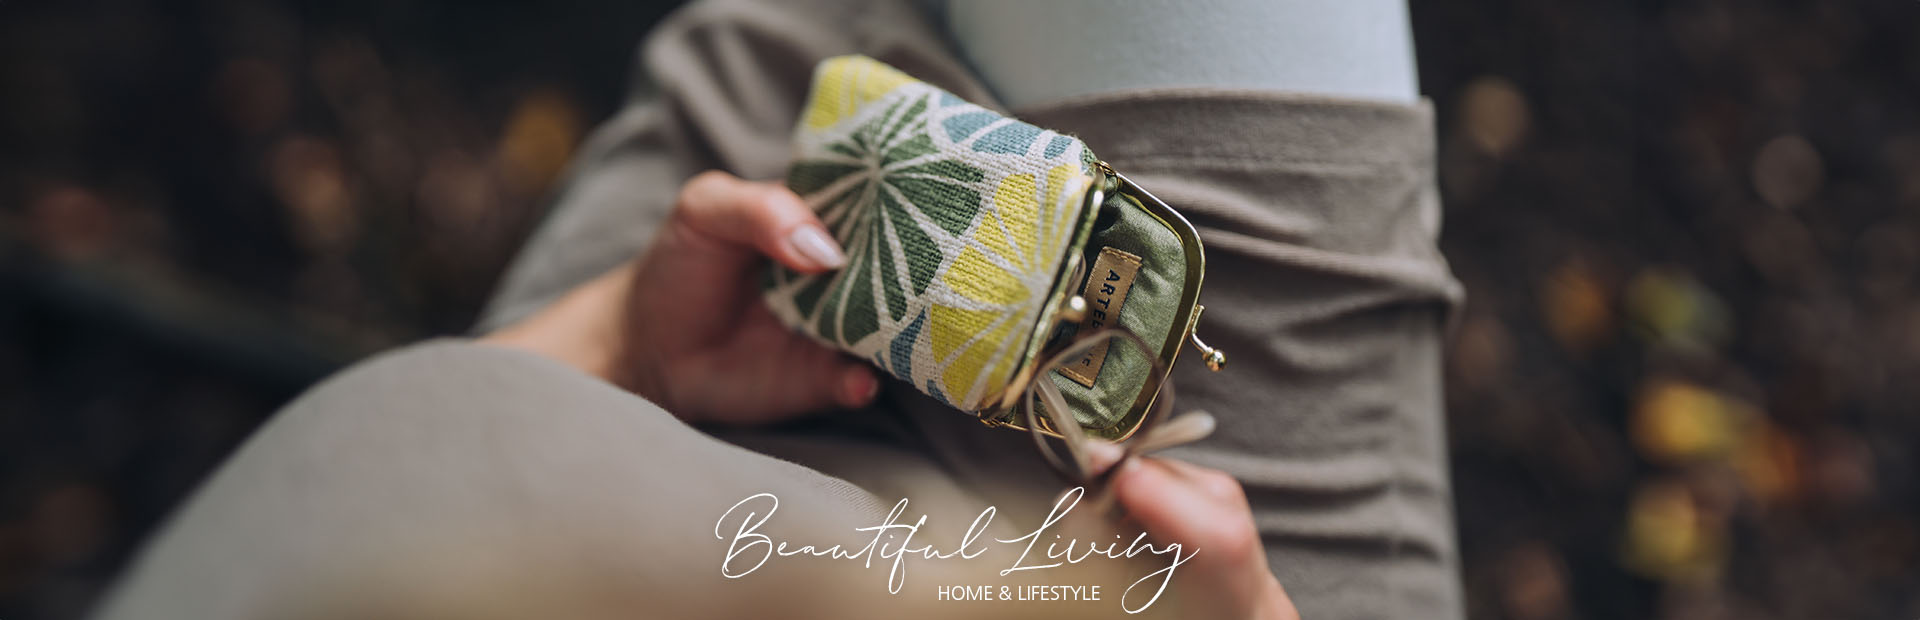 Beautiful living - Home & Lifestyle